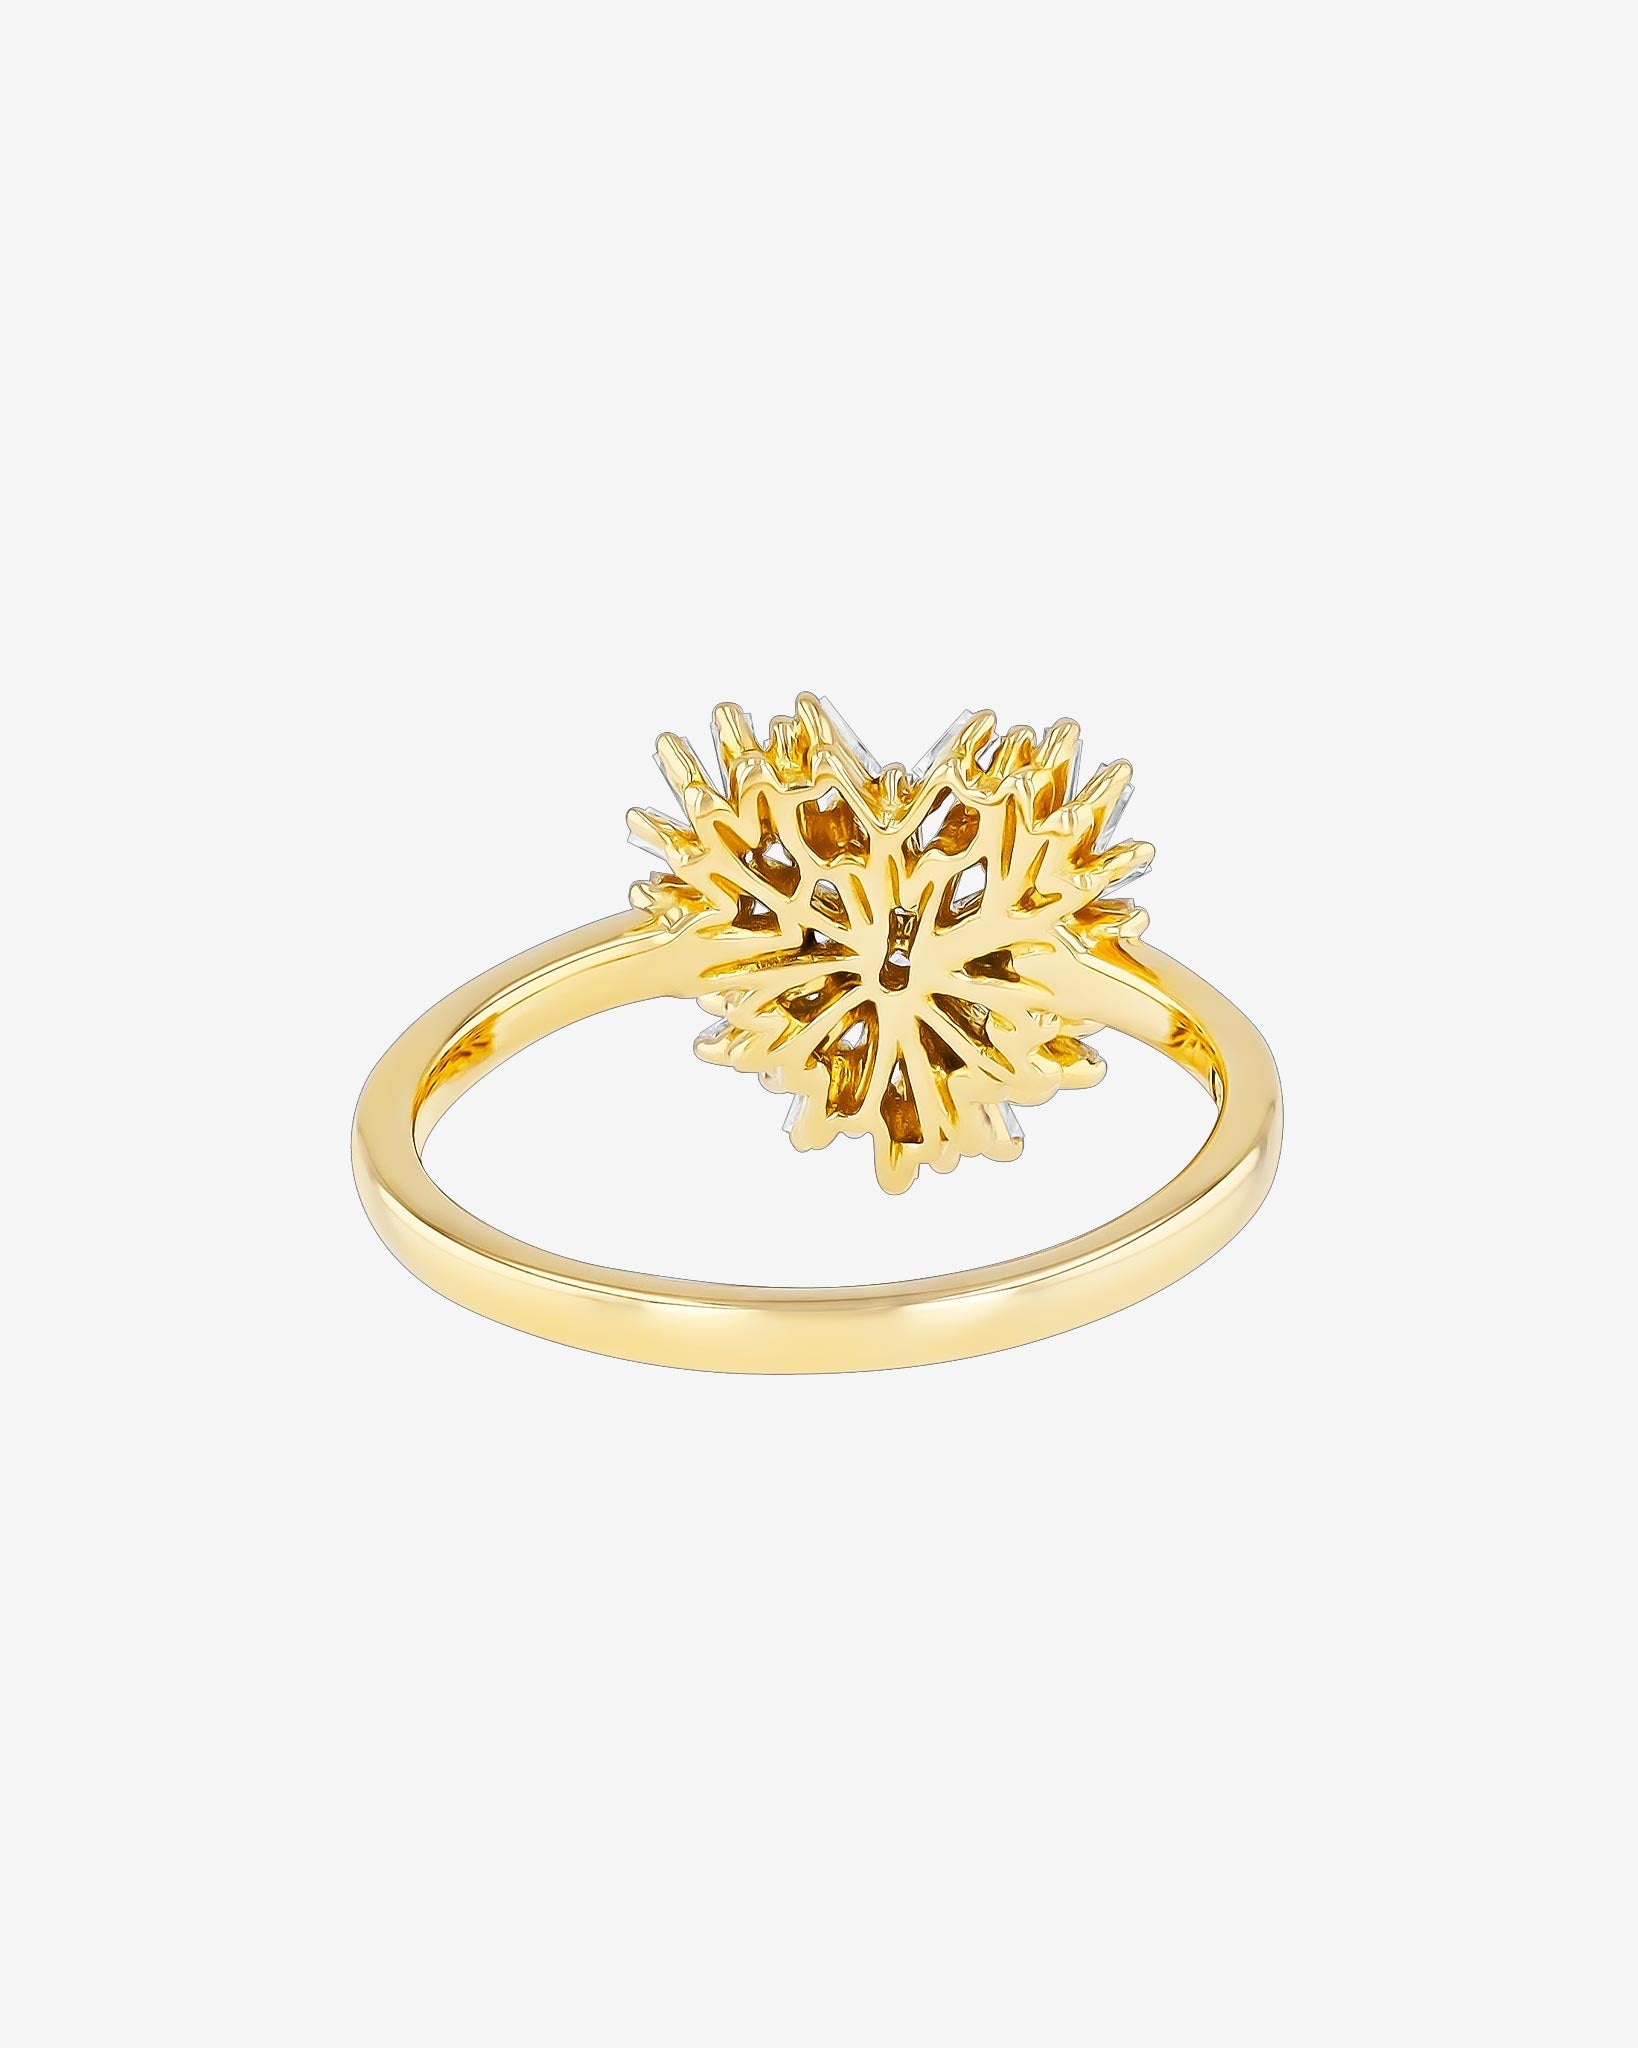 Suzanne Kalan Classic Diamond Small Heart Ring in 18k yellow gold